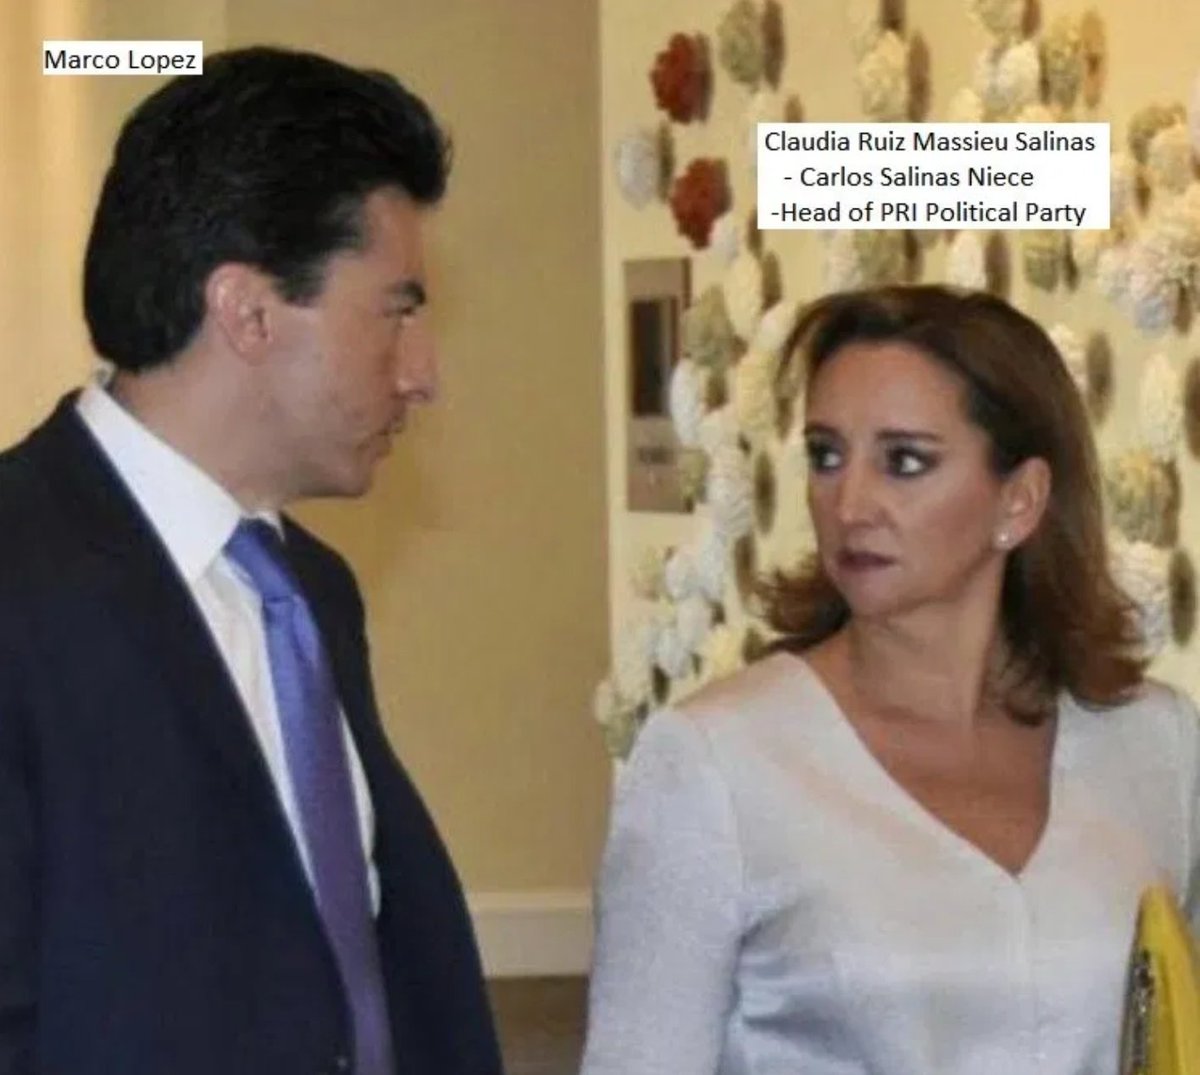 Marco Lopez with his pal, Claudia Salinas who runs the Mexico-PRI political party. These are the people influencing Ducey.